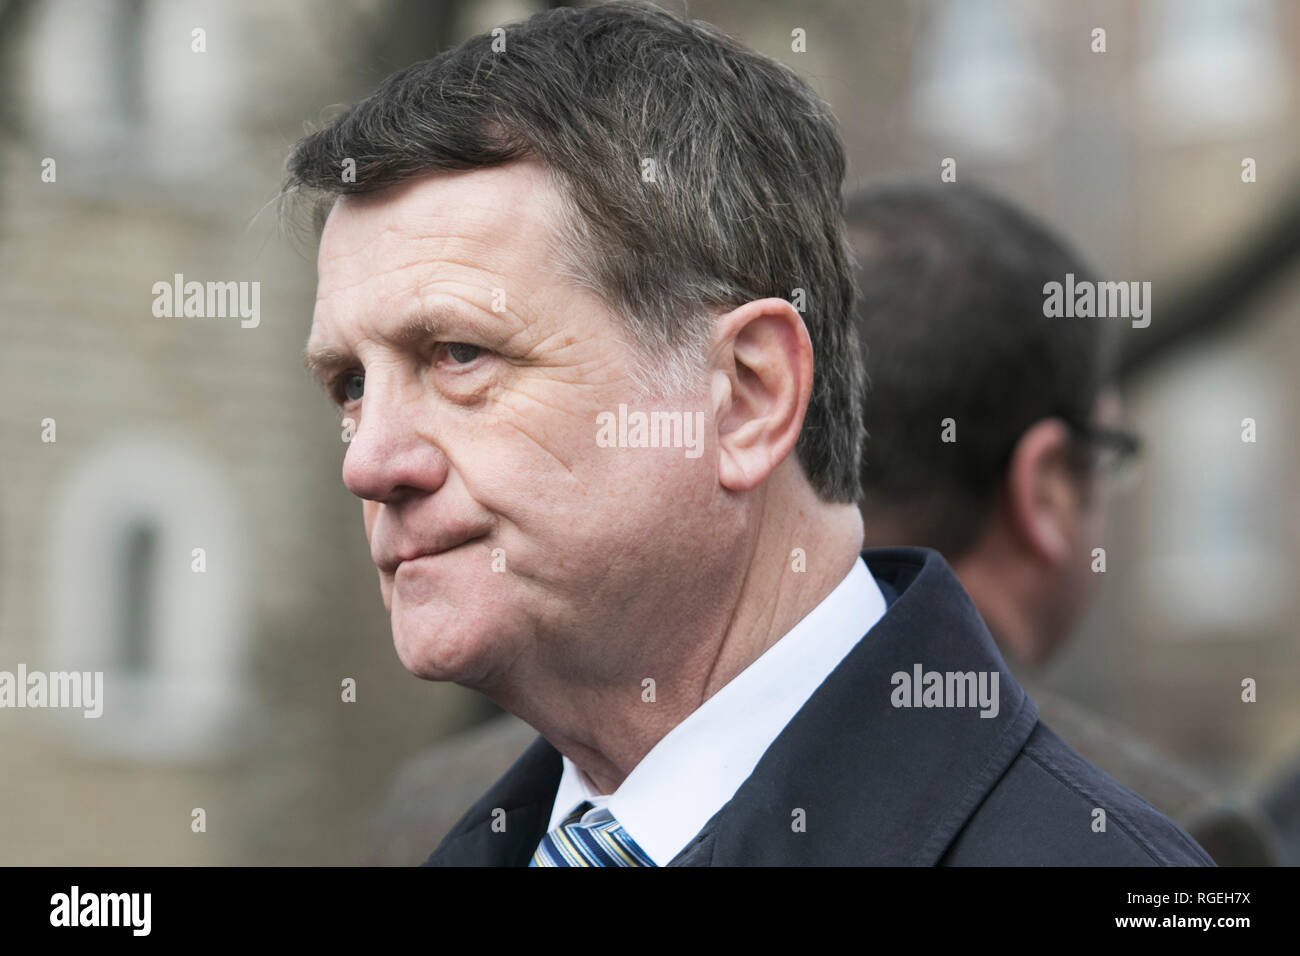 London UK. 29th January 2019. UKIP Leader Gerard Batten who has been a member of the European Parliament since 2018 is seen  at Westminster on the day Members of Parliament vote on several key Brexit amendments. Gerard Batten became leader of UKIP and  succeeded Henry Bolton  in 2018 Credit: amer ghazzal/Alamy Live News Stock Photo